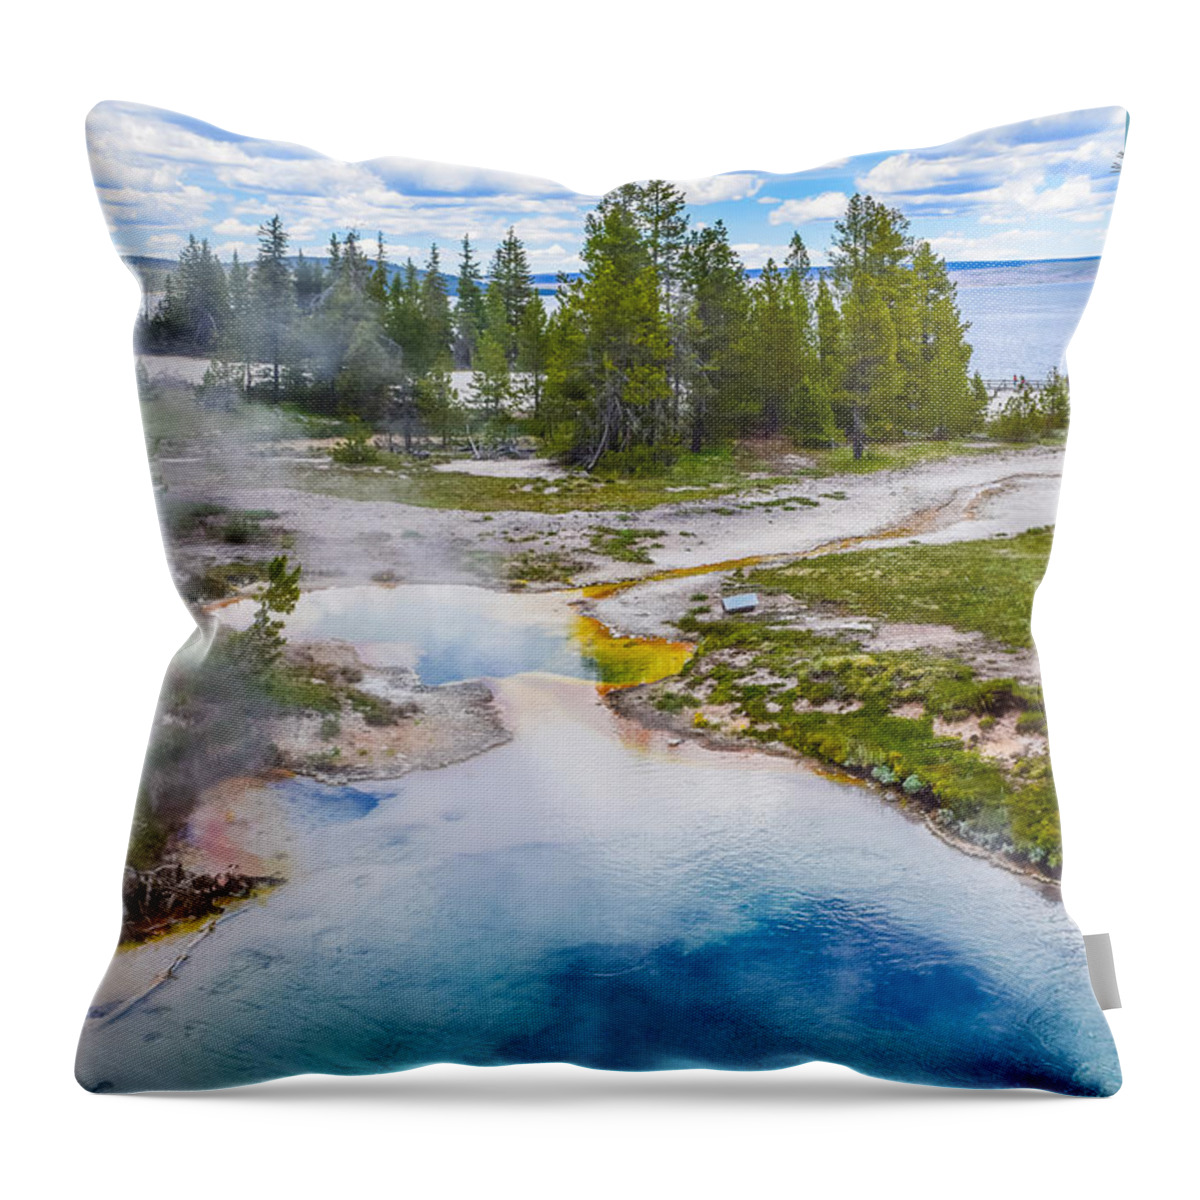 Seismograph Throw Pillow featuring the photograph Seismograph Pool - Yellowstone National Park by Bonny Puckett